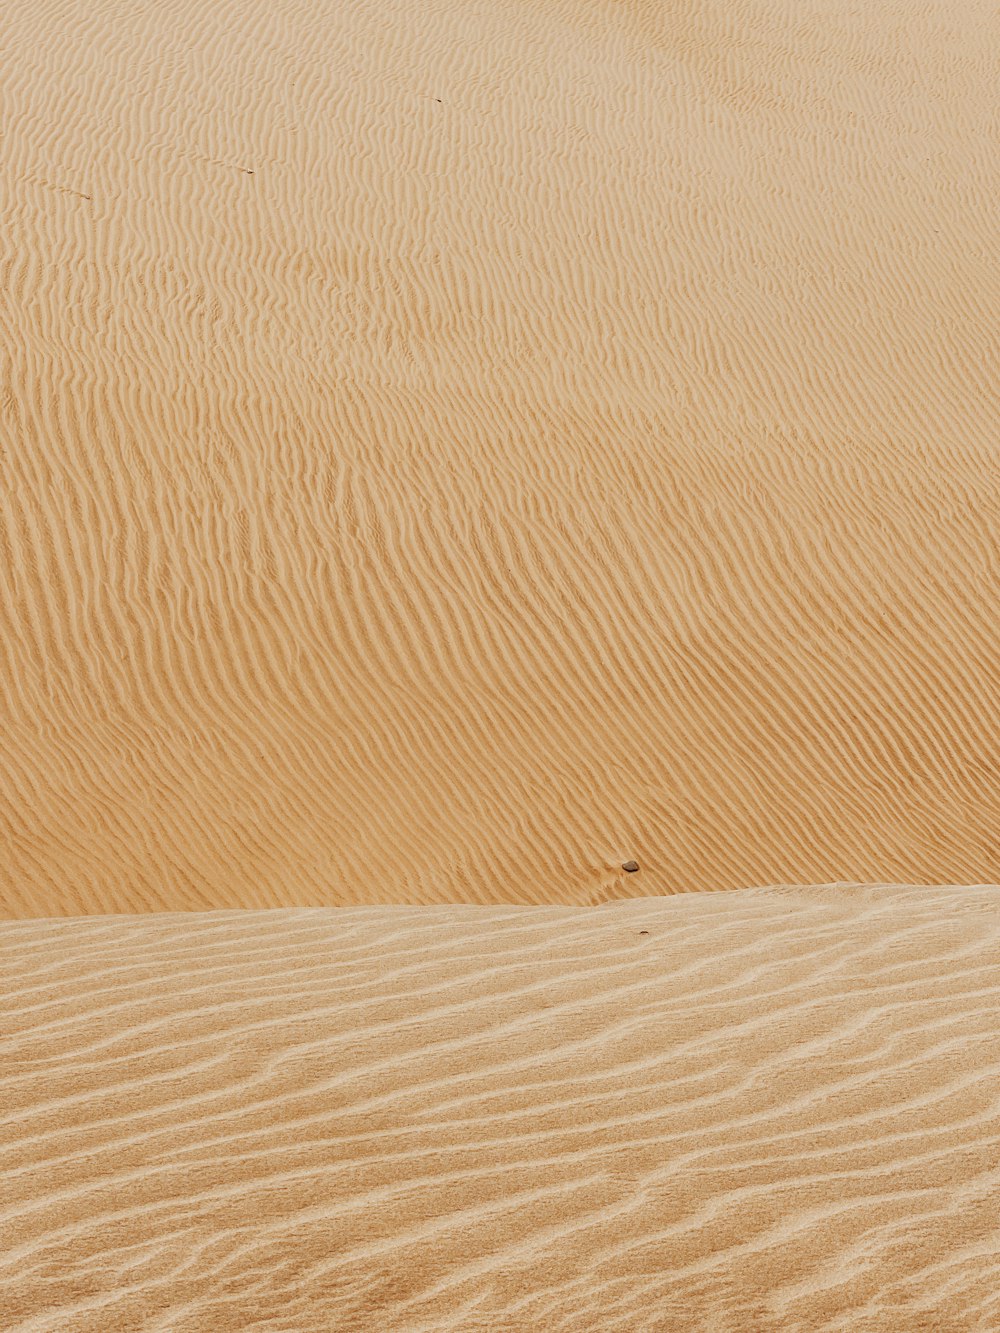 a lone camel standing in the middle of a desert